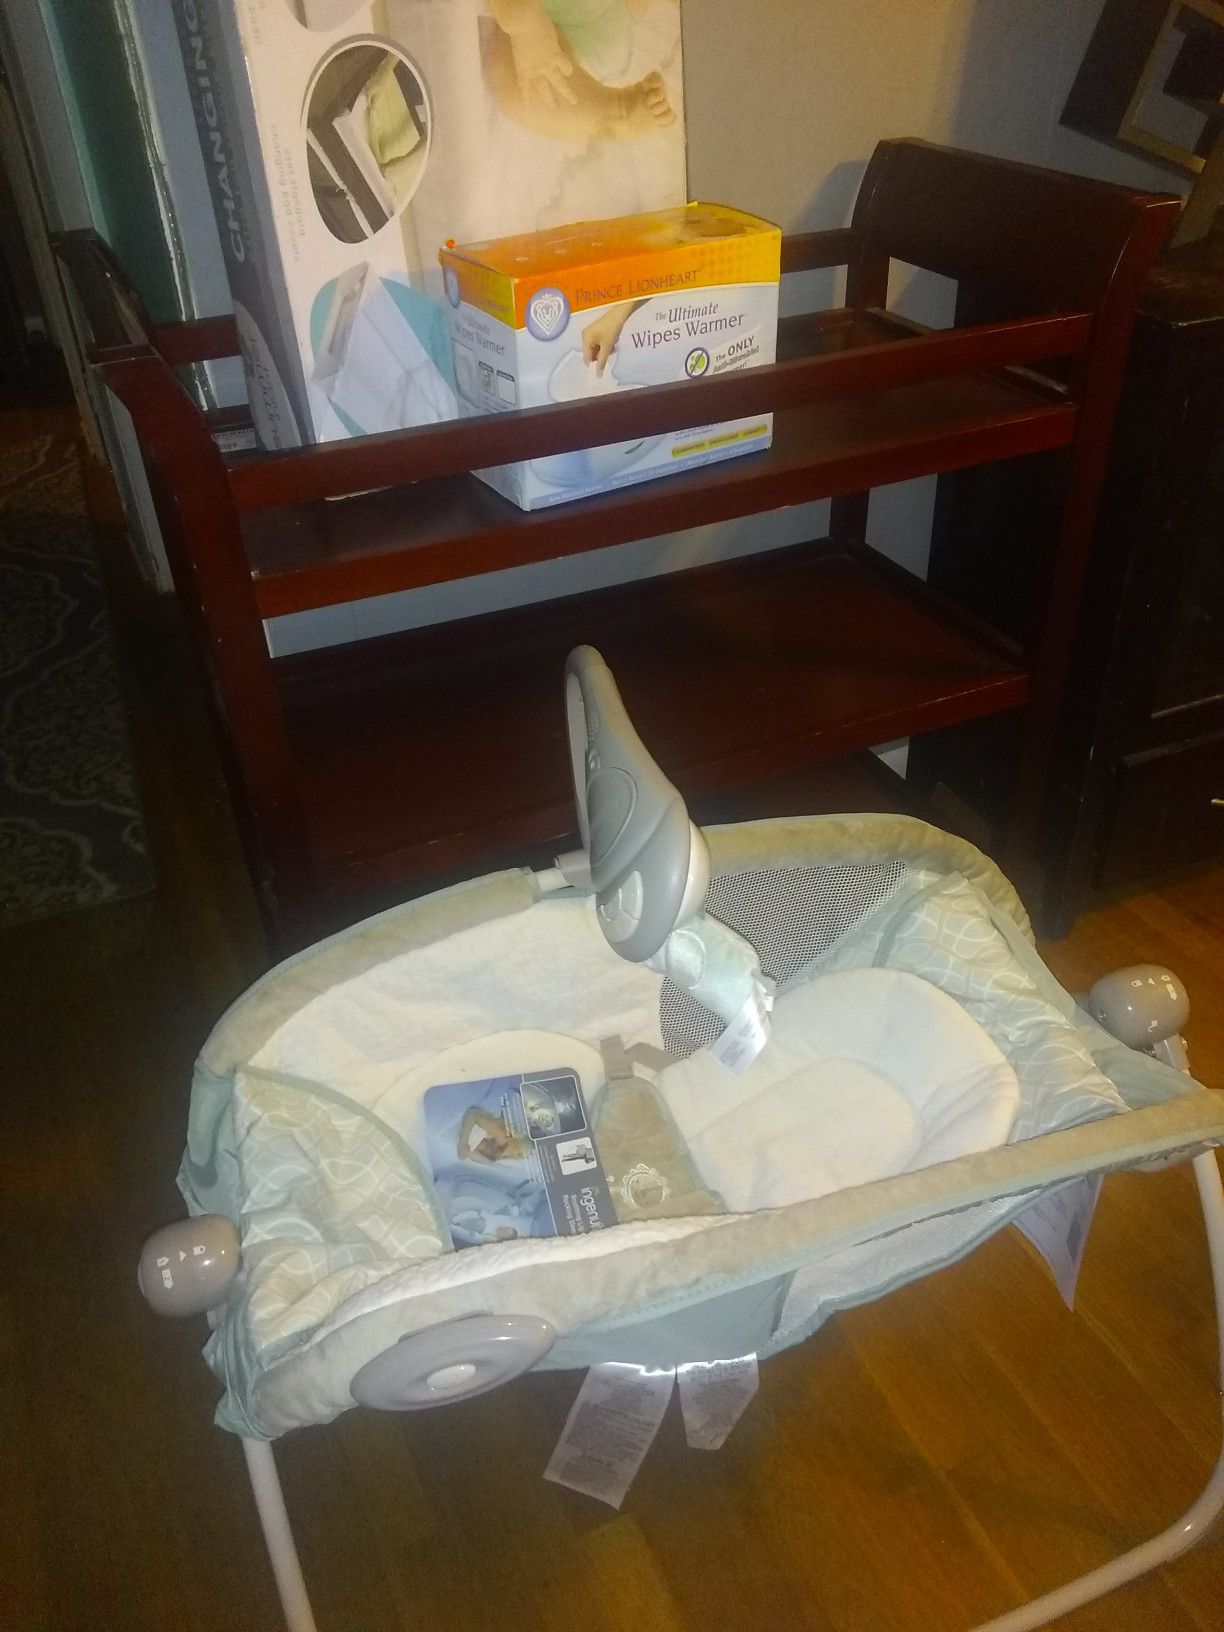 Baby changing table,new baby changing pad,new whipe warmer and new sleeping rocker will deliver for a small fee